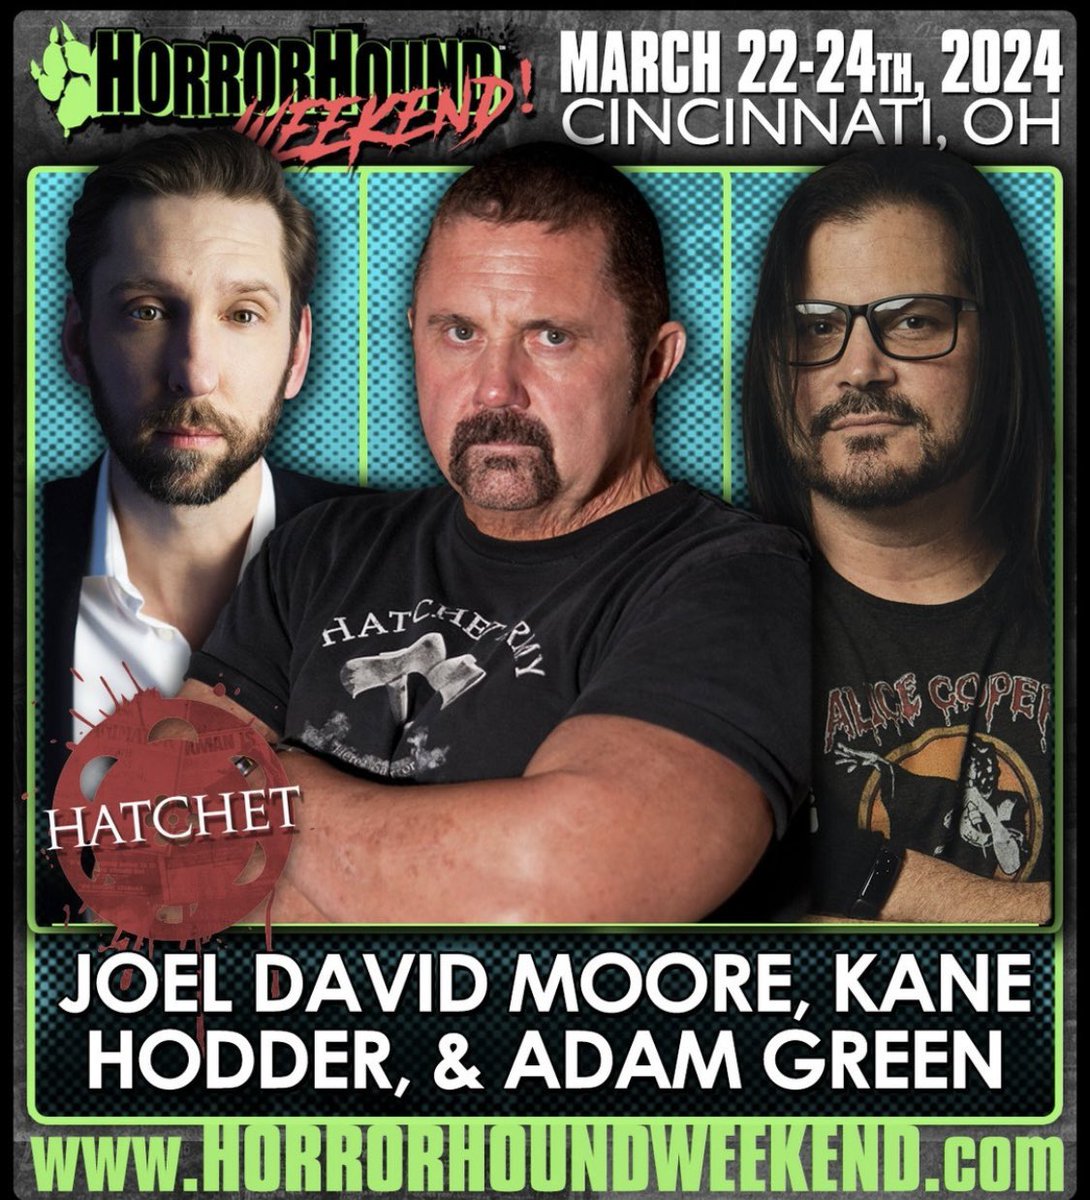 Wicked excited to return to Cincinnati for @horrorhound this weekend! Lots of #HATCHET series alumni will be there including @kanehodder1 @joeldavidmoore @zwgman Joshua Leonard and so many more friends and fiends! See you soon! (And see you next month Michigan and New Jersey!)